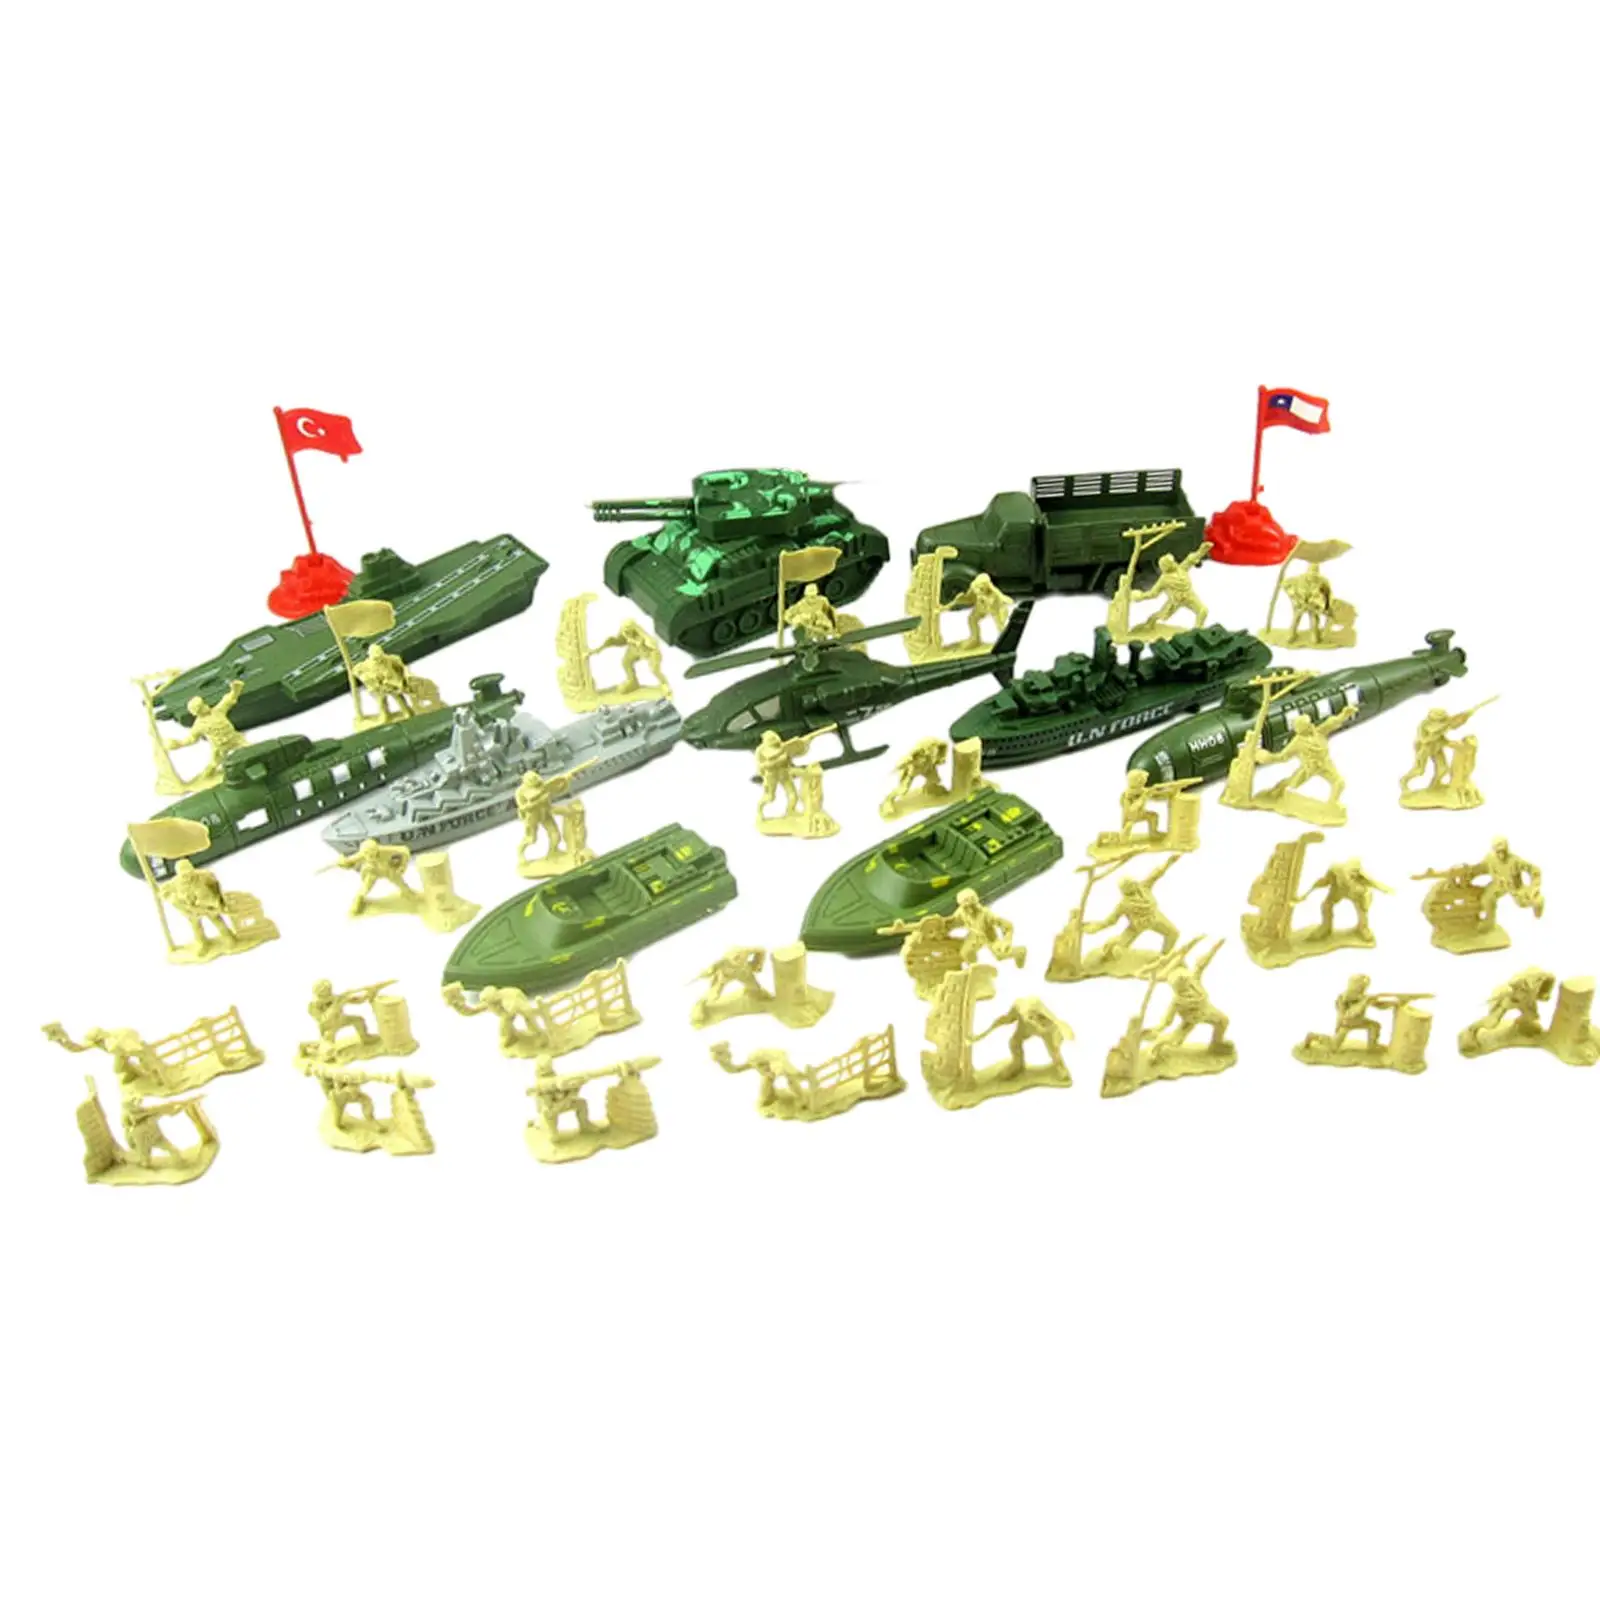 52x Model Soldier Figures Battle Scene Diorama Mini Playset with Tank Vehicle Accessories for Children Kids Adults Boys Teens